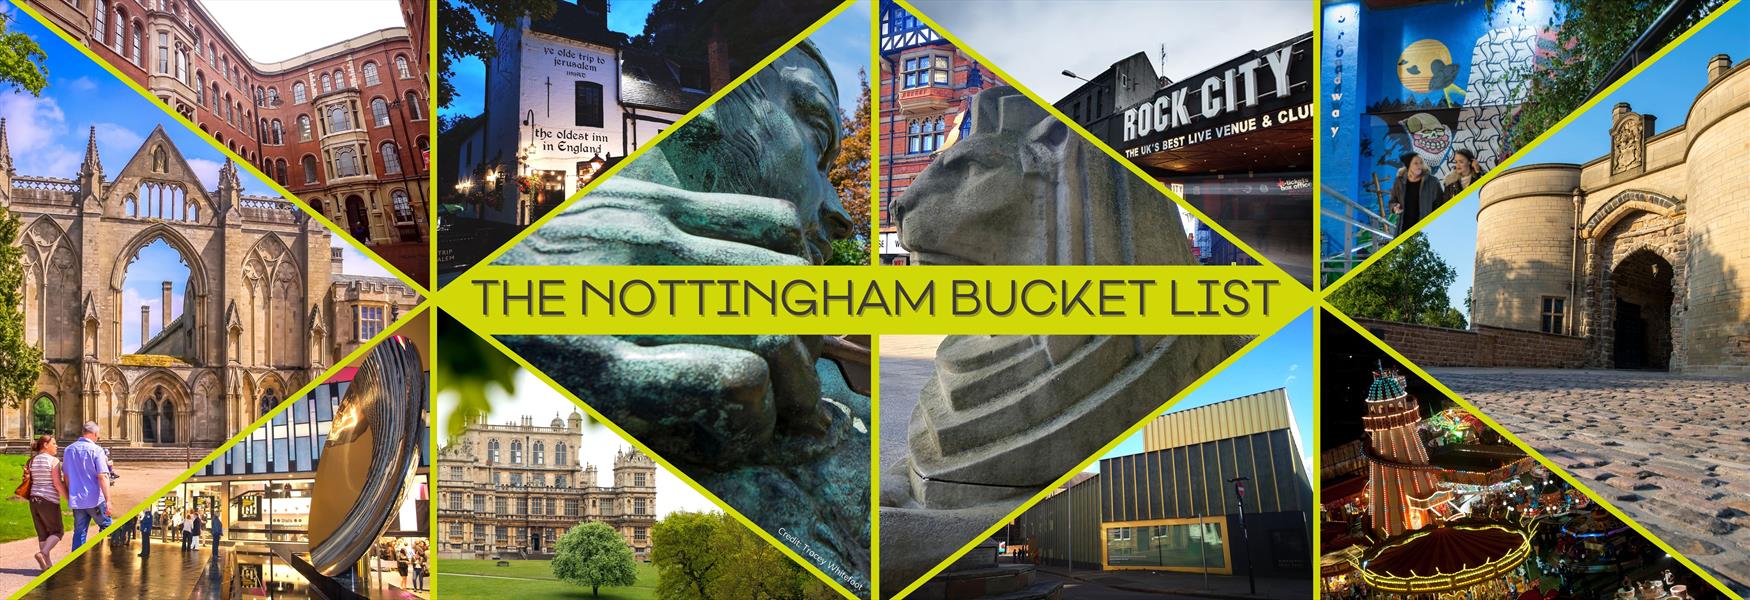 top 10 places to visit in nottingham